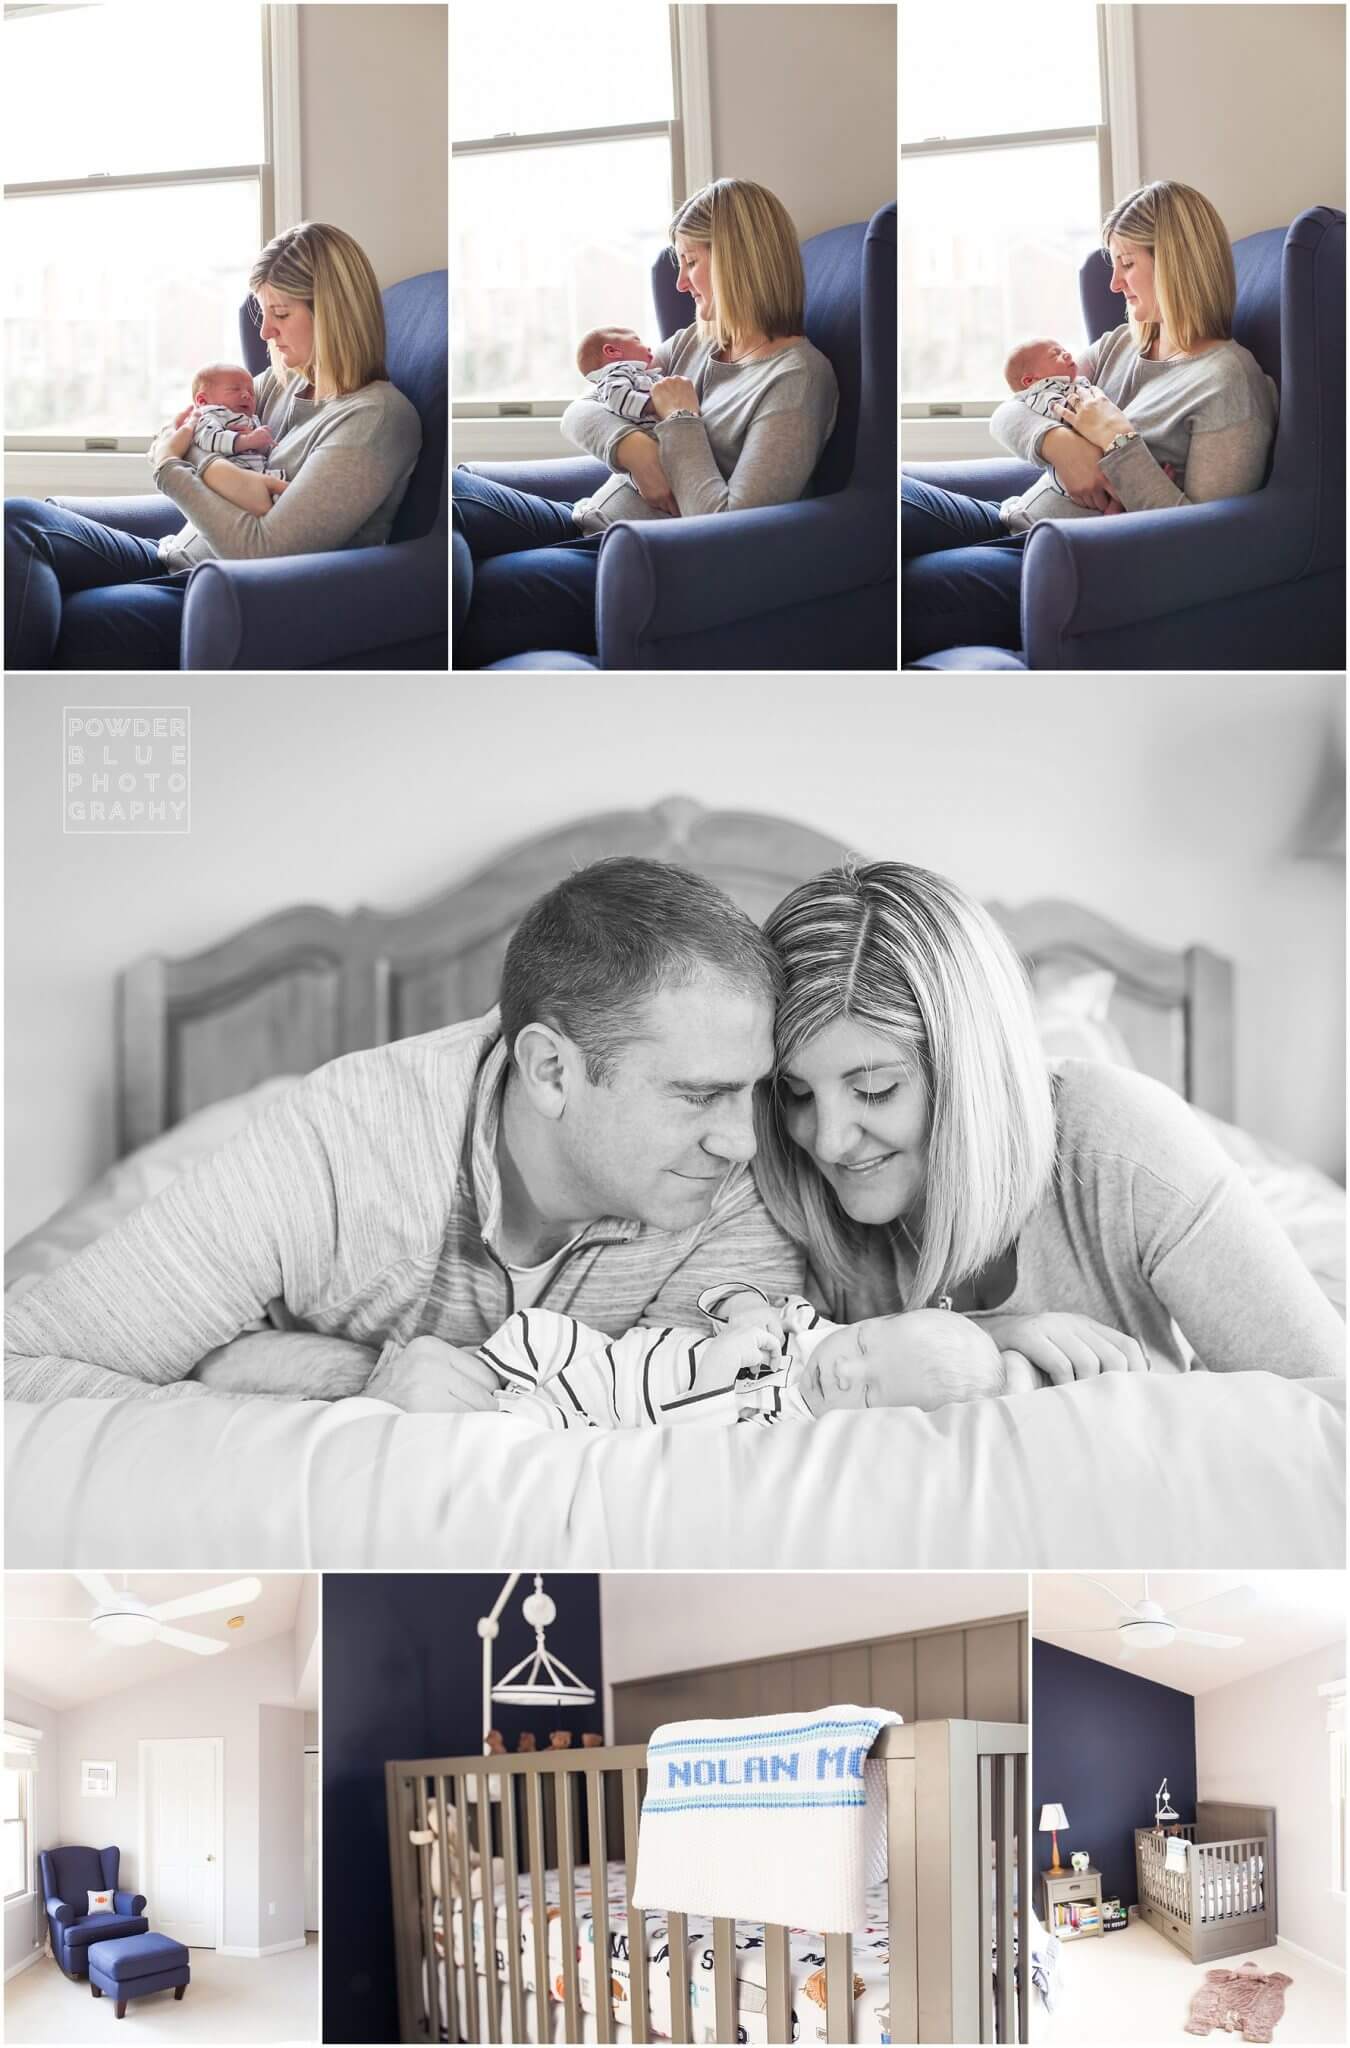 pittsburgh newborn photography session in home. baby boy born in pittsburgh, Sports nursery theme.